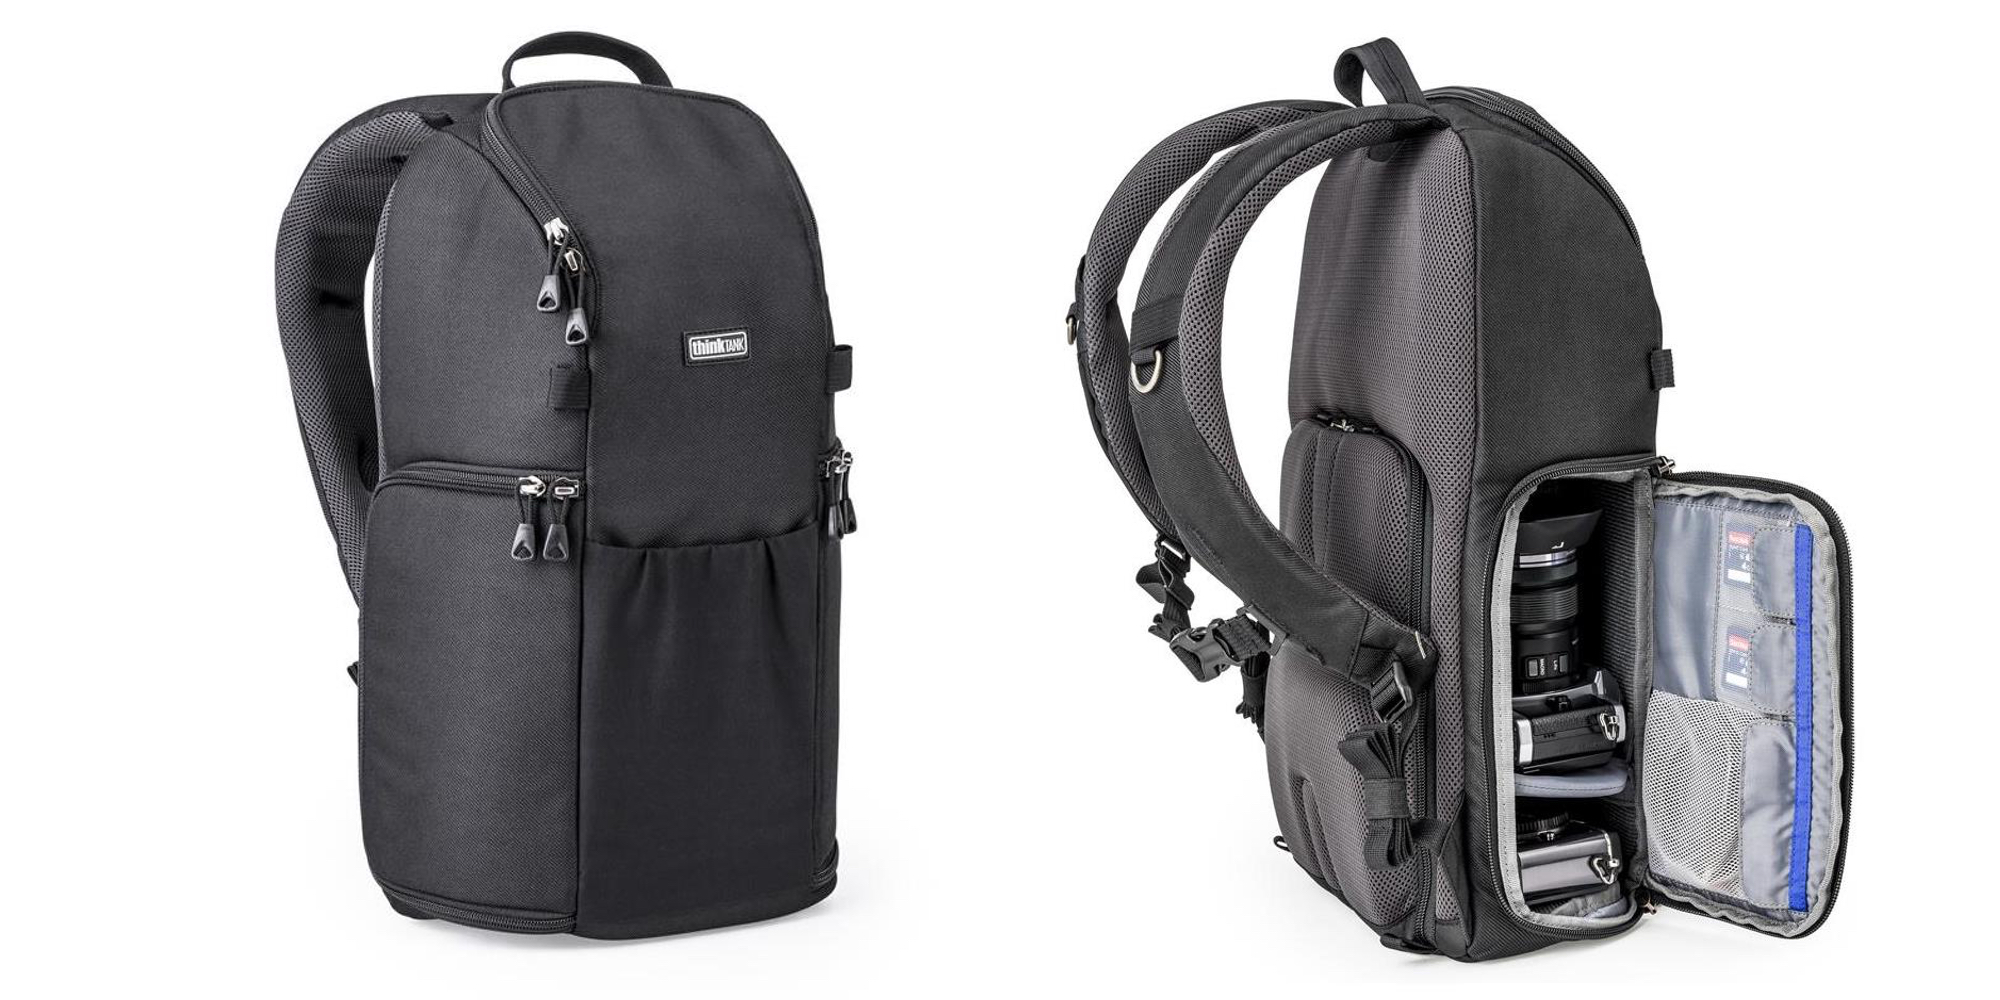 Think Tank Trifecta 8 Camera Bag holds all your photography gear for $60 (Reg. $140) - 9to5Toys